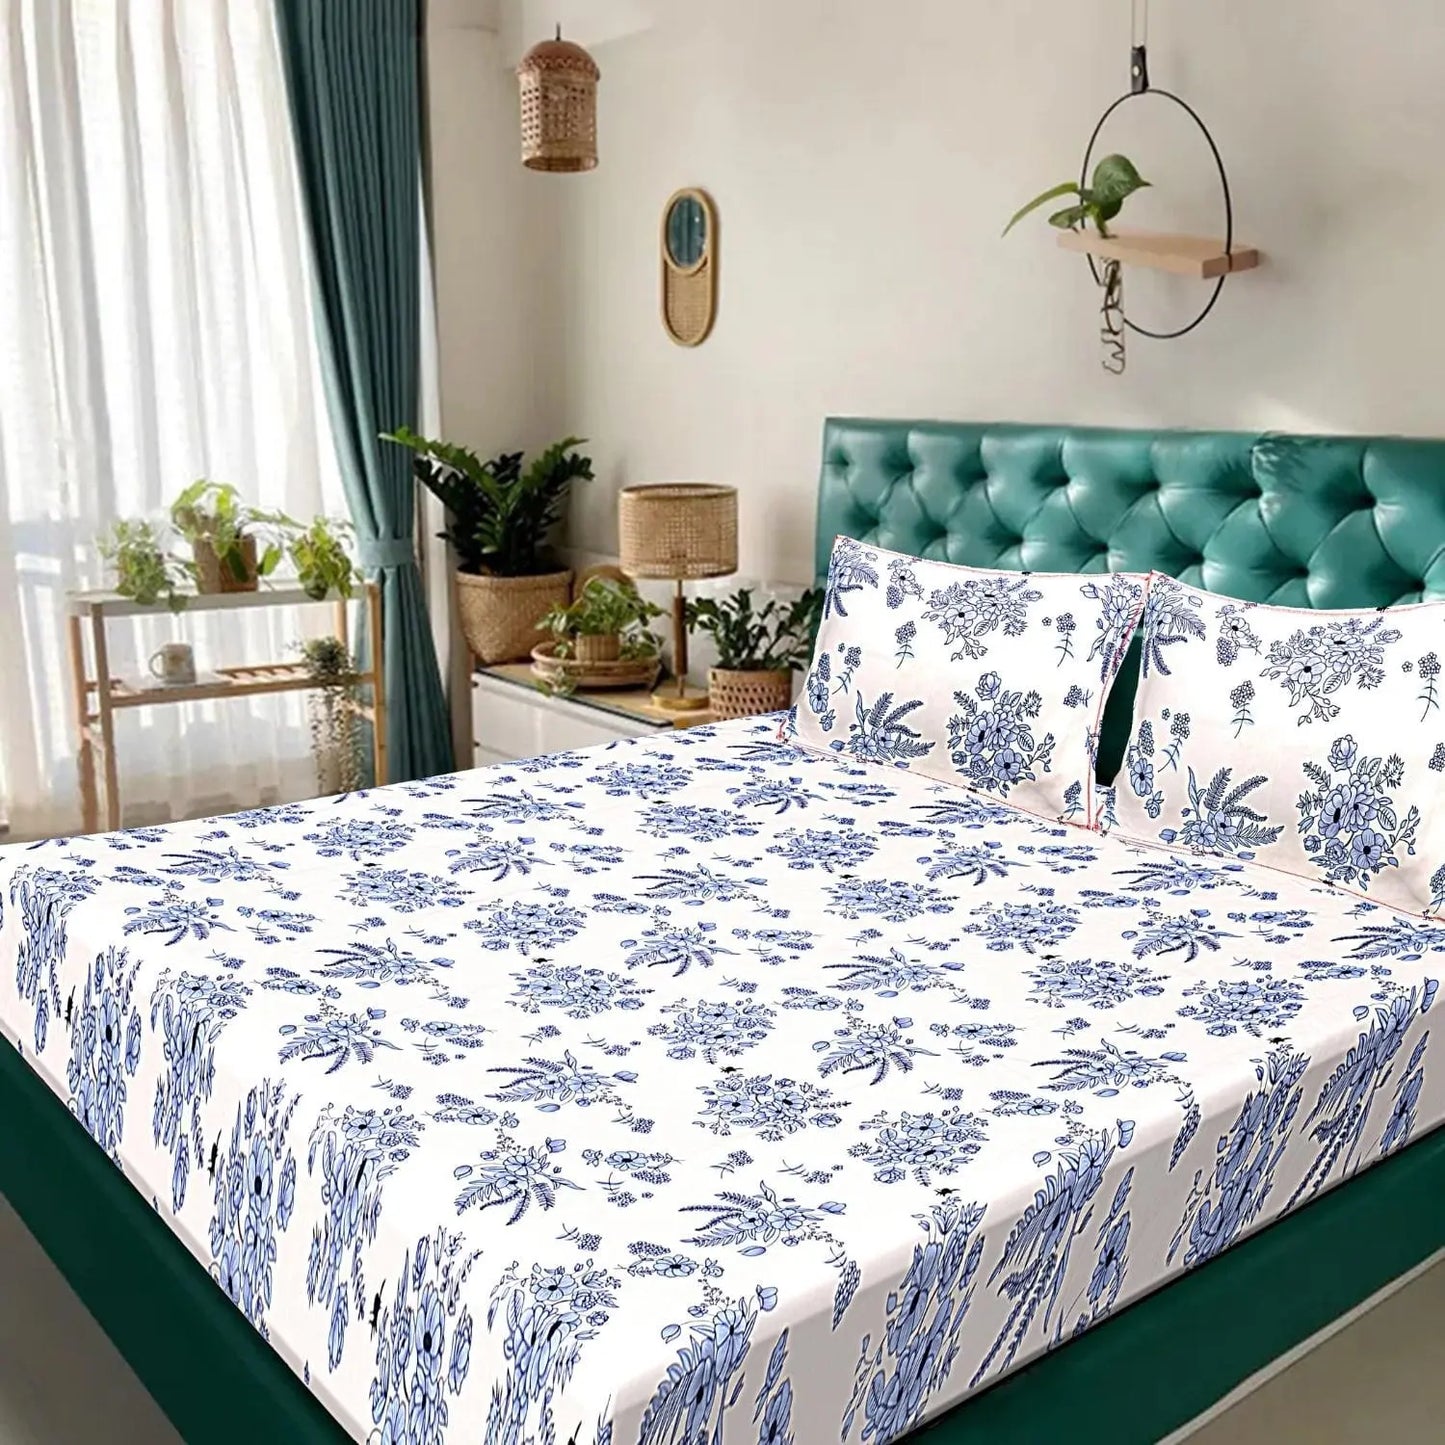 Feathered Petals Double Bed Bedsheet